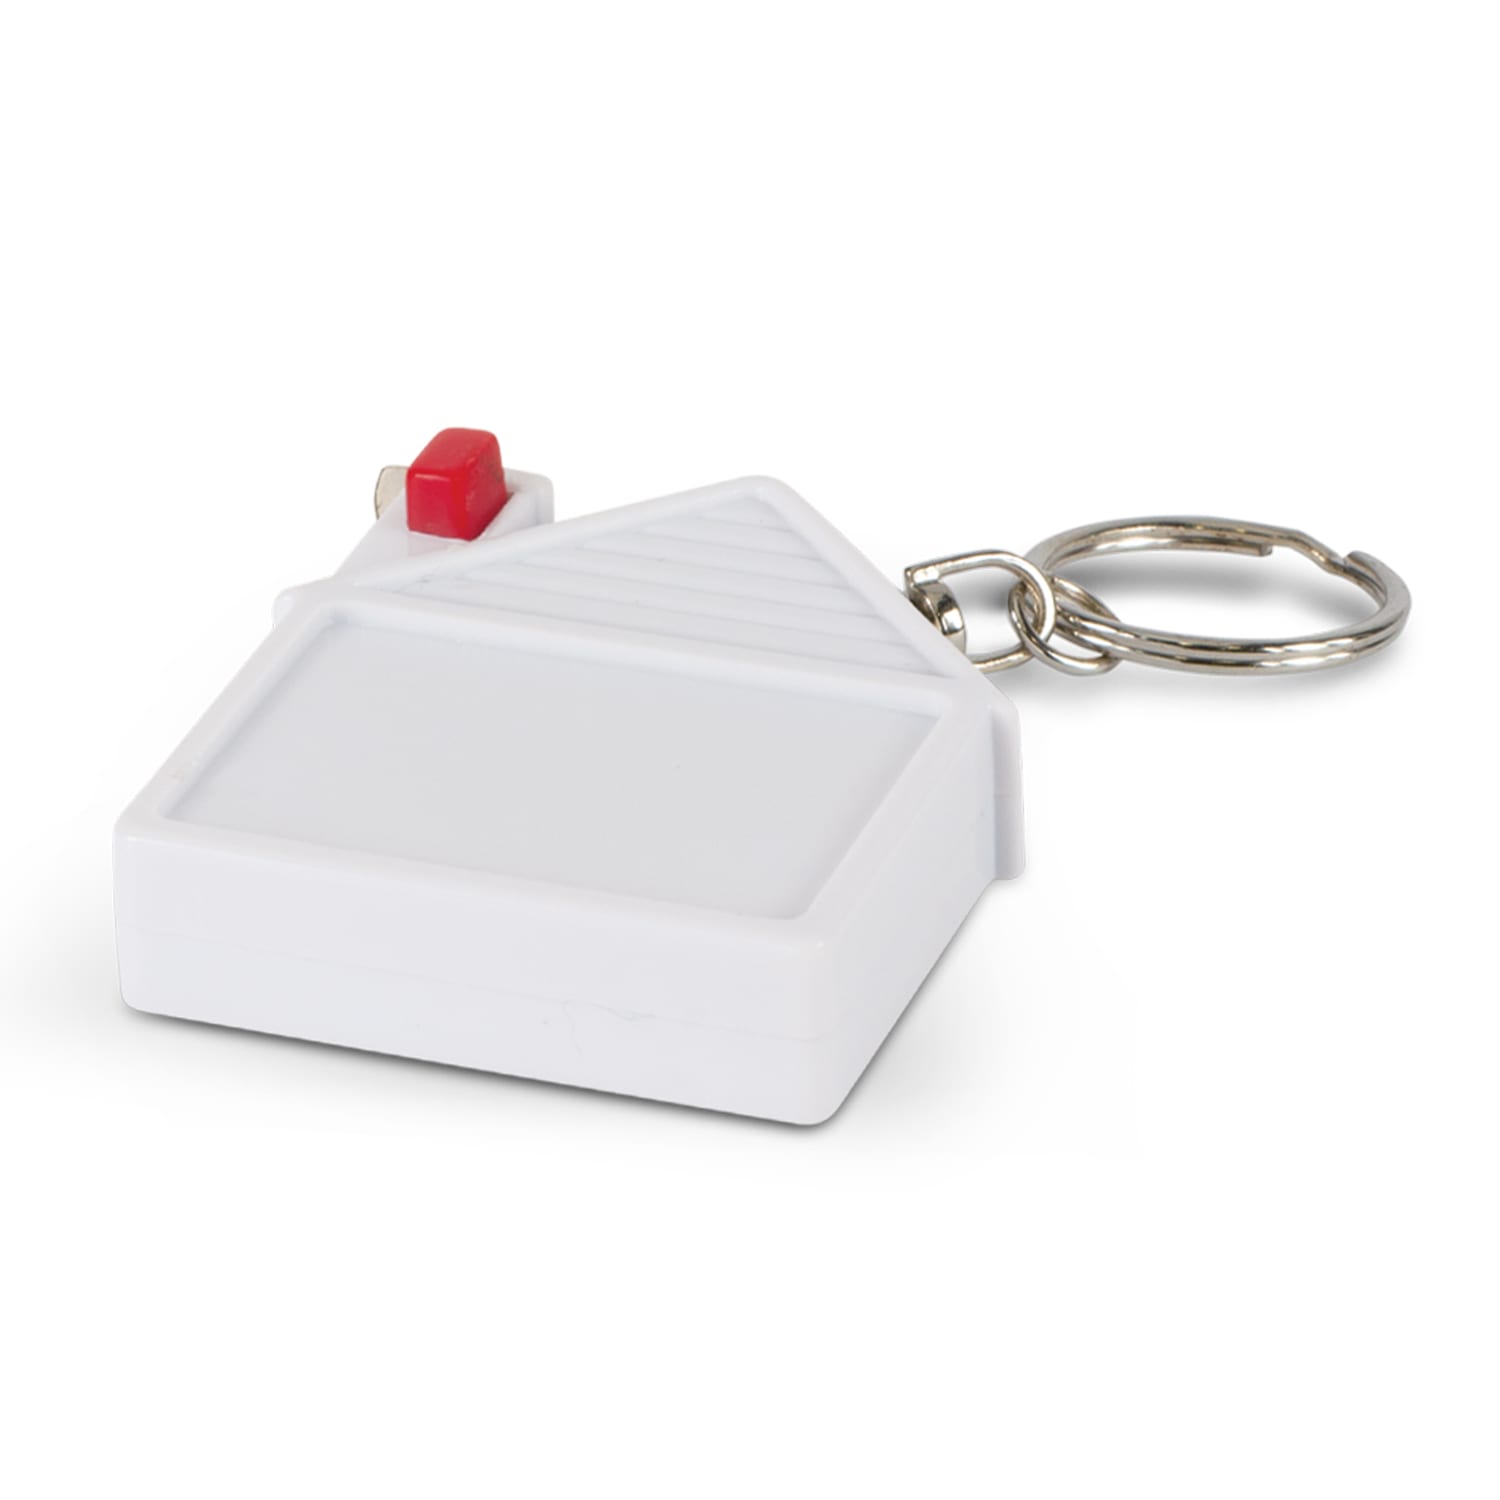 Real Estate House Tape Measure Key Ring House